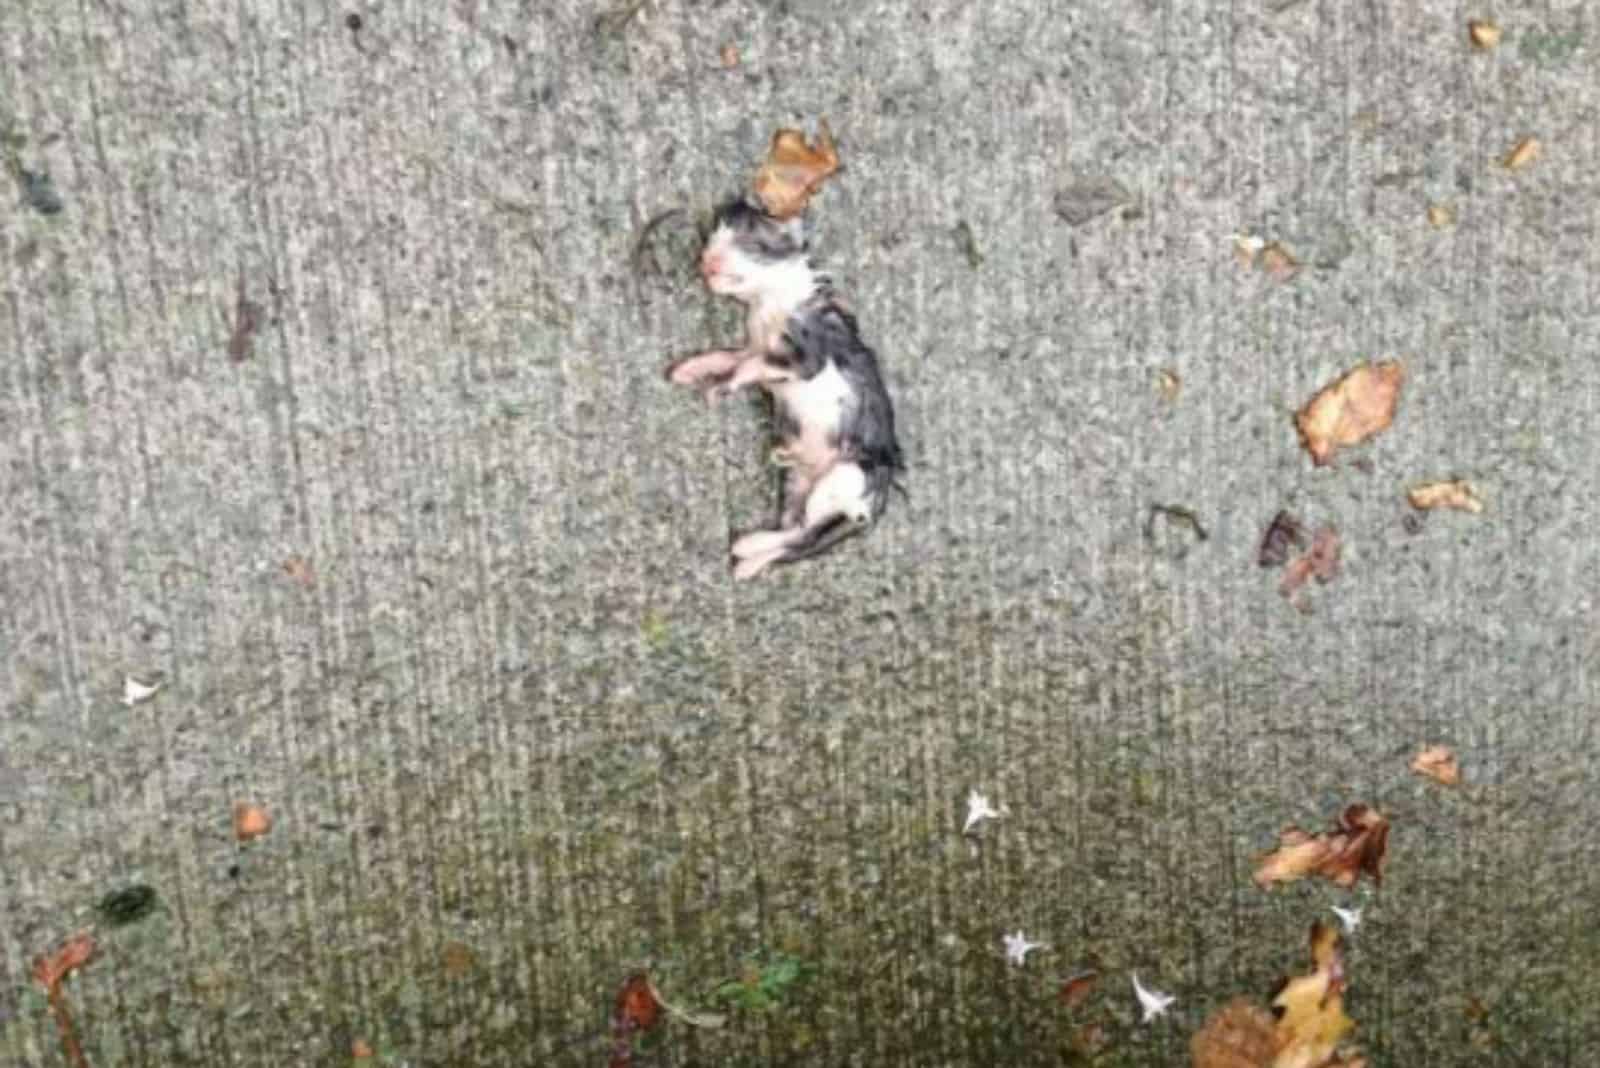 small soaked kitten lying on the pavement